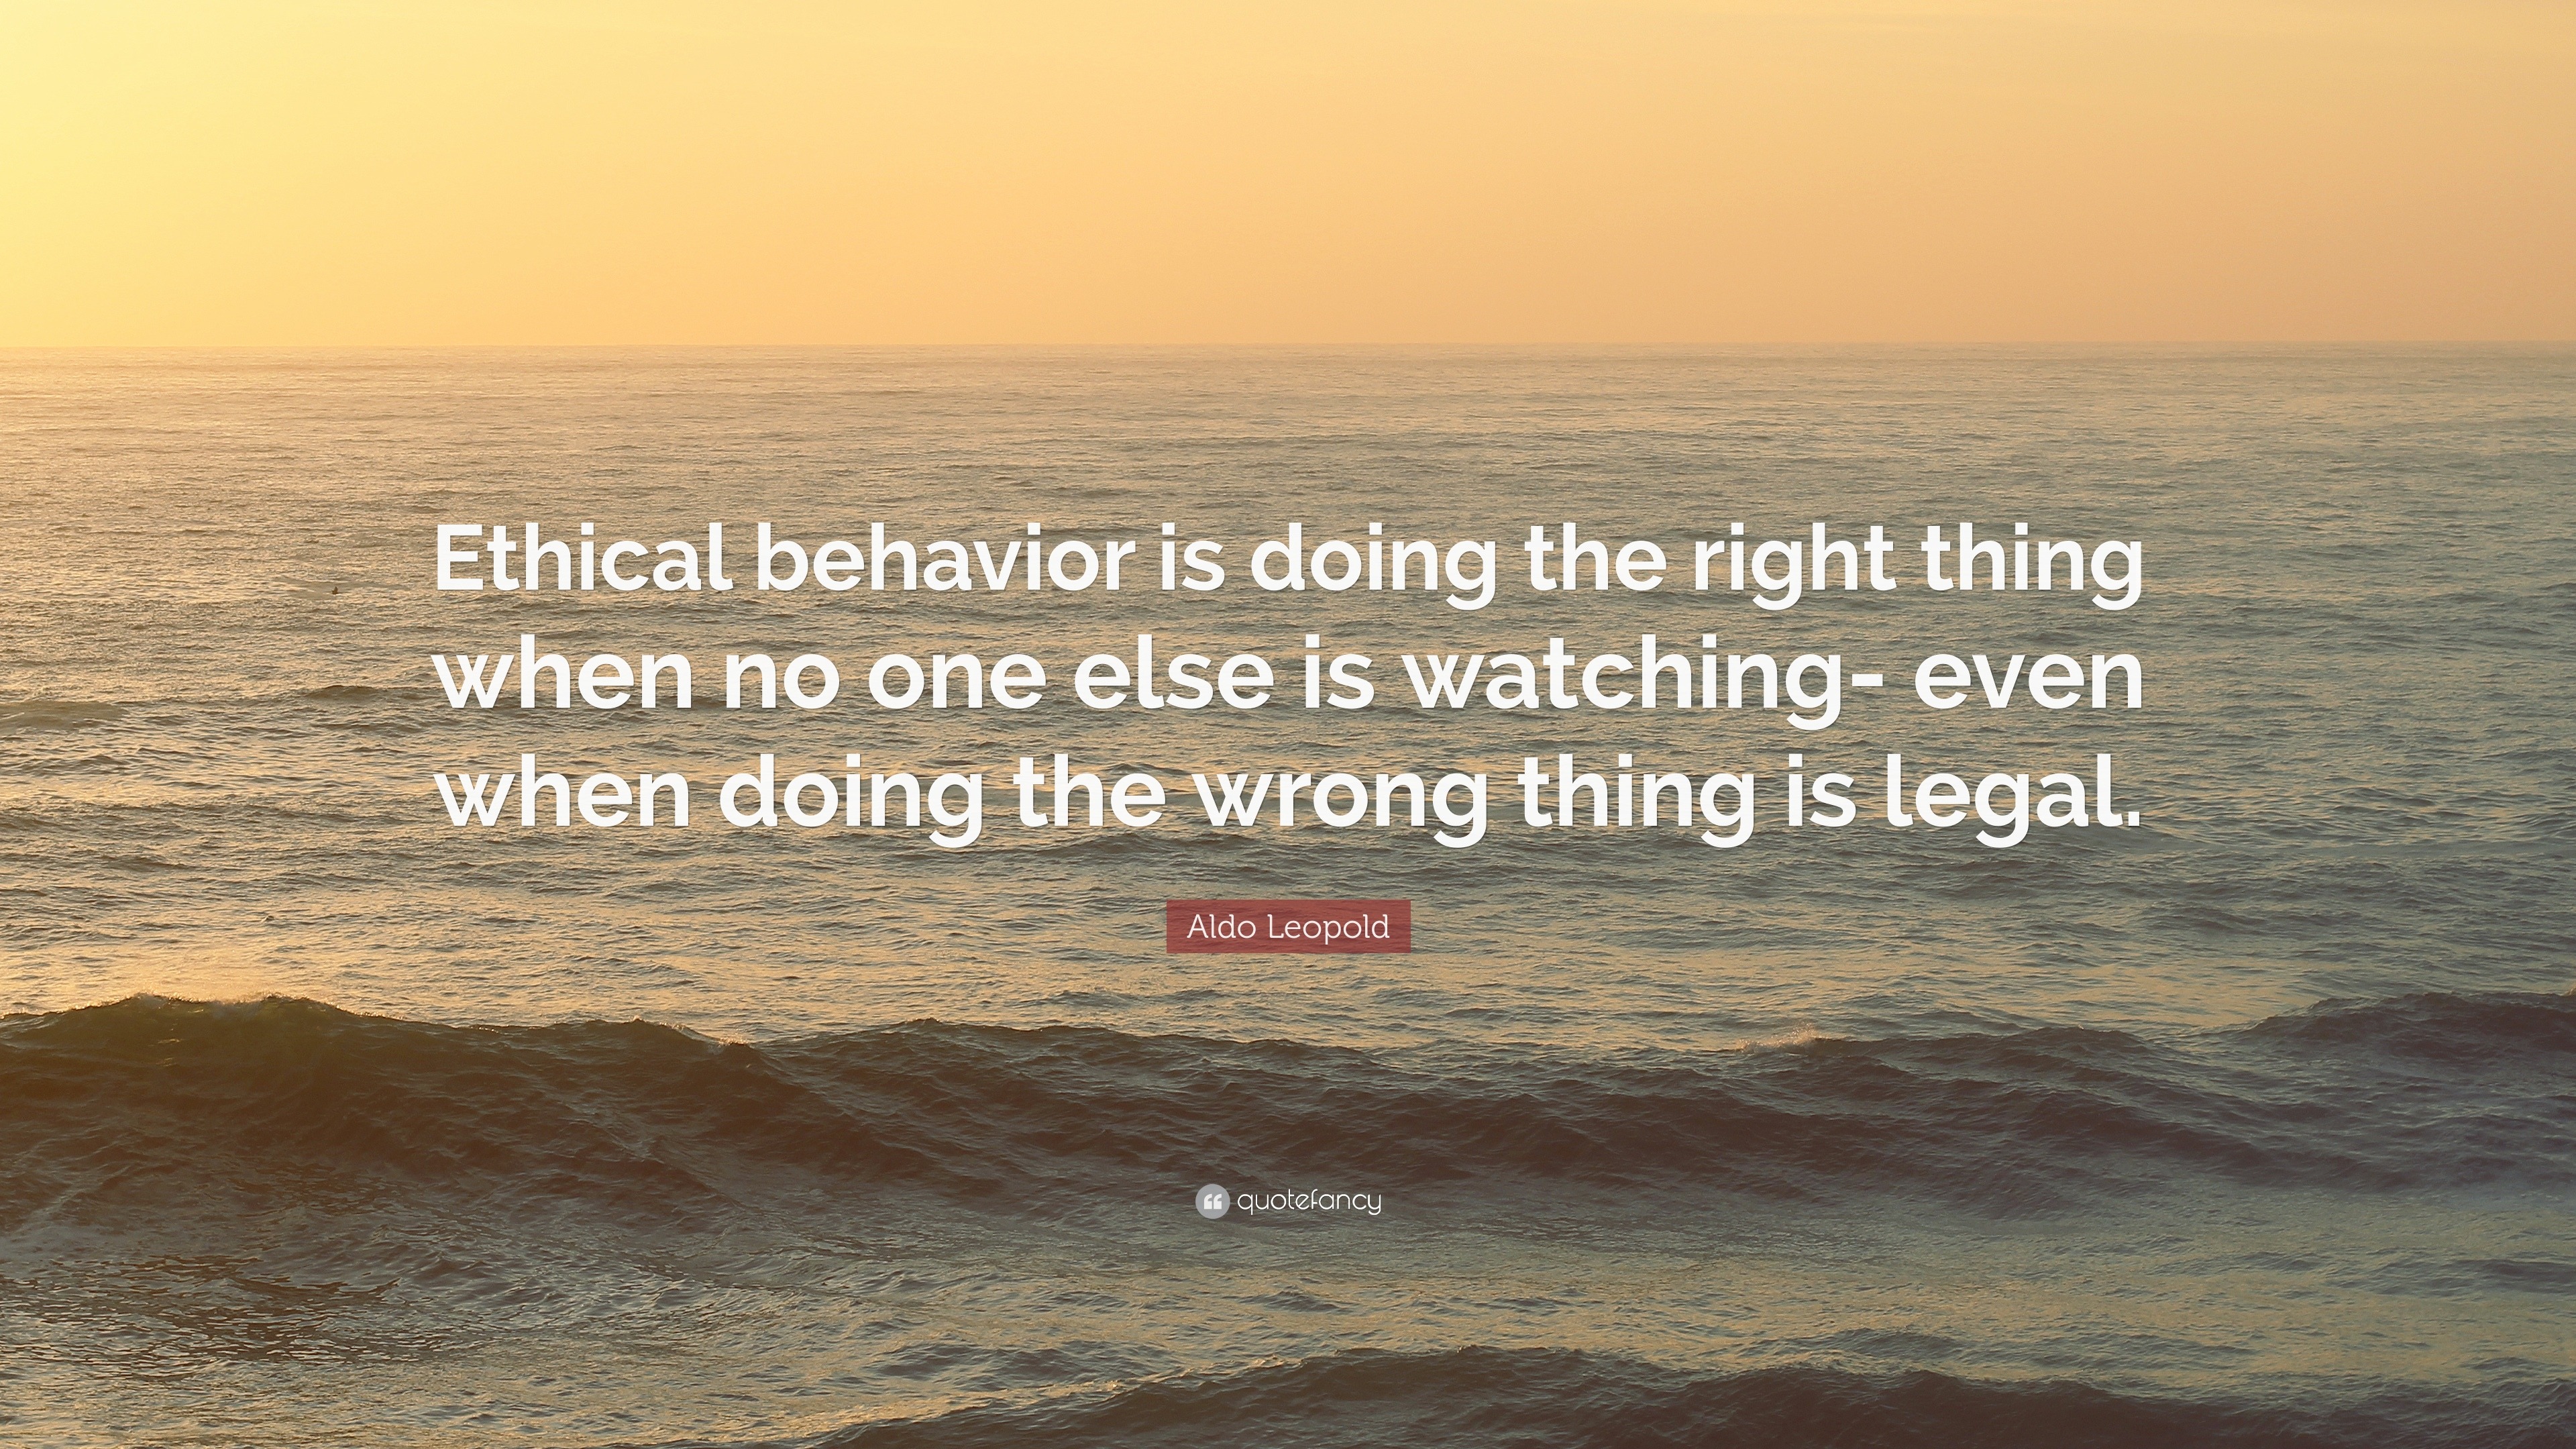 Aldo Leopold Quote: “Ethical behavior is doing the right thing when no